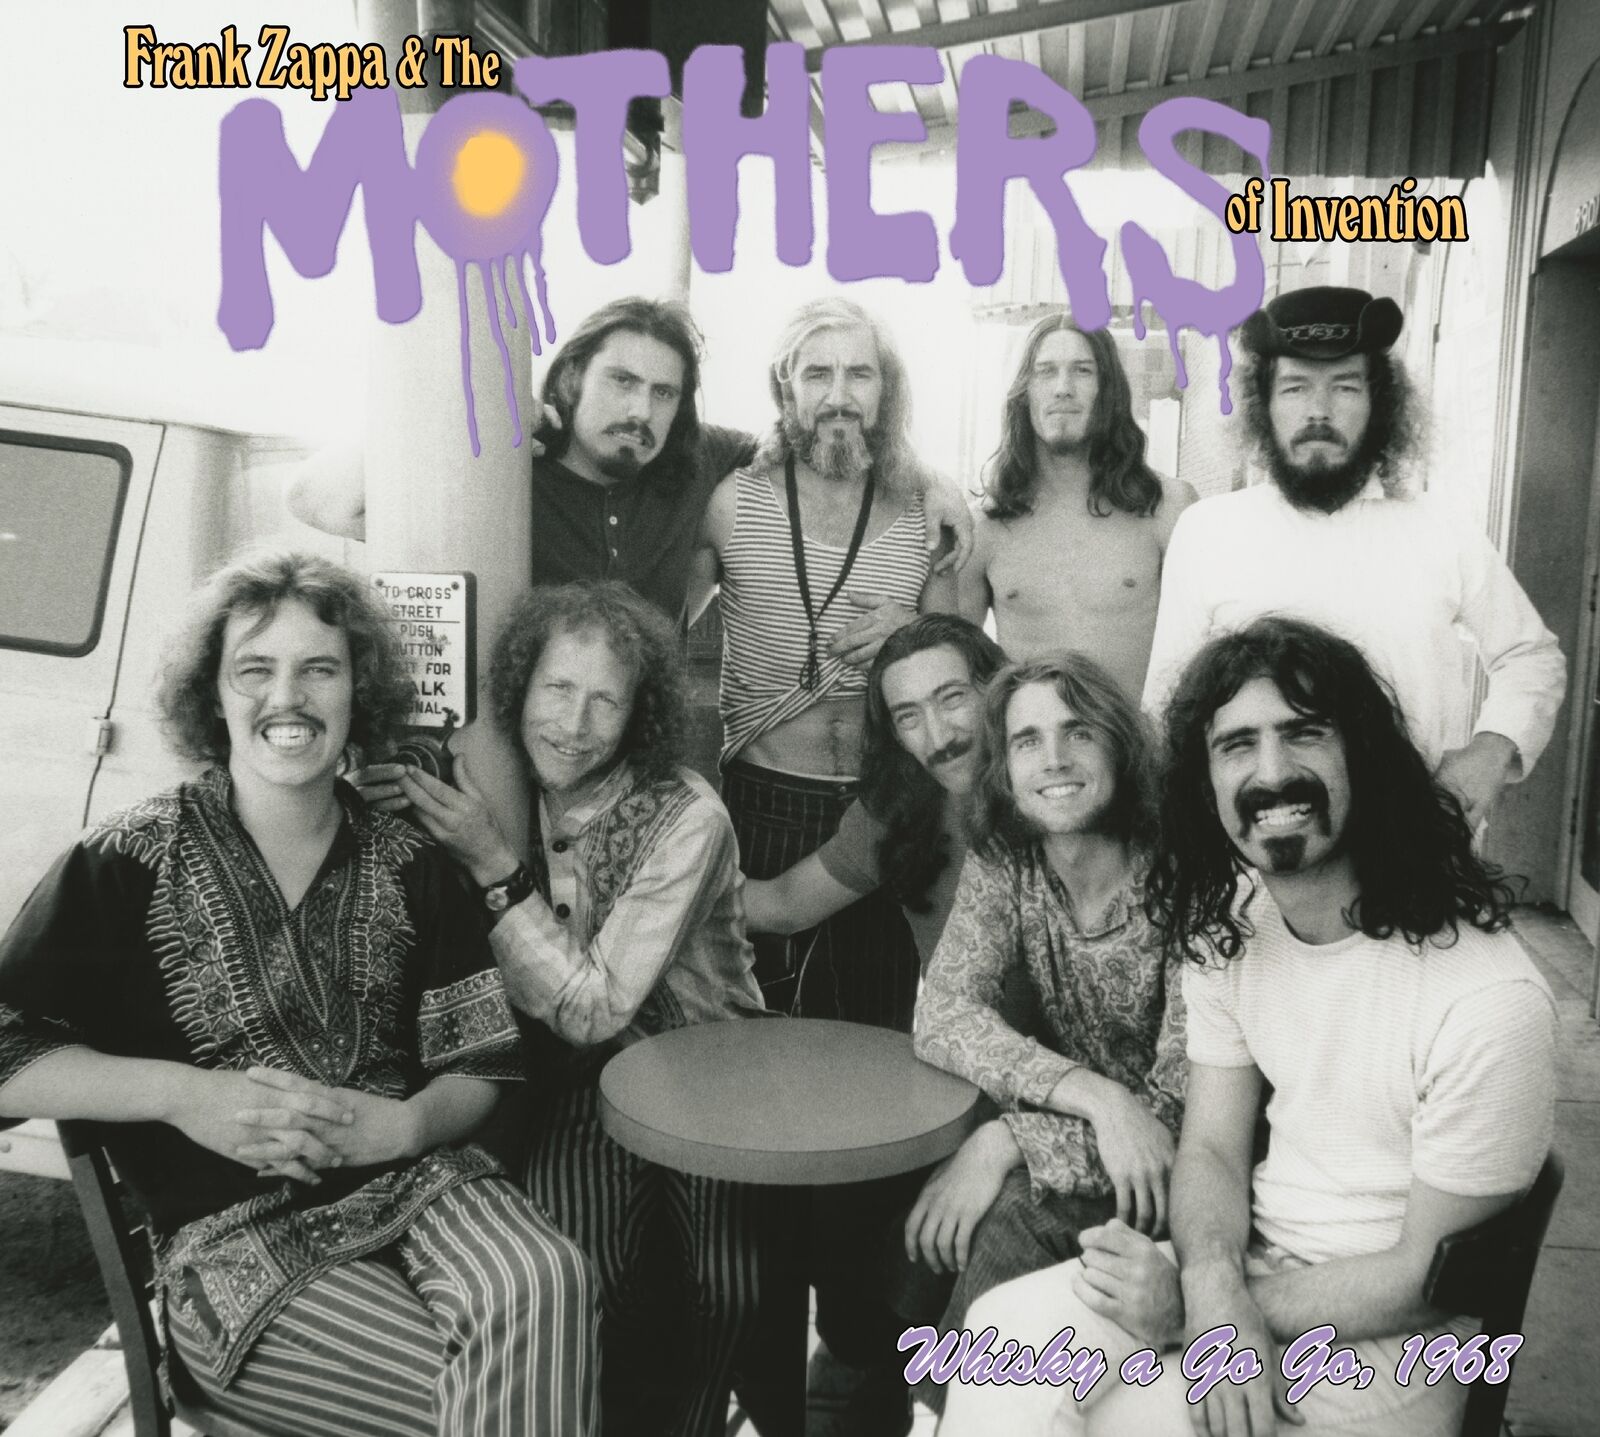 Frank Zappa & The Mothers of Invention Whiskey a Go Go 1968 (CD) (UK IMPORT)